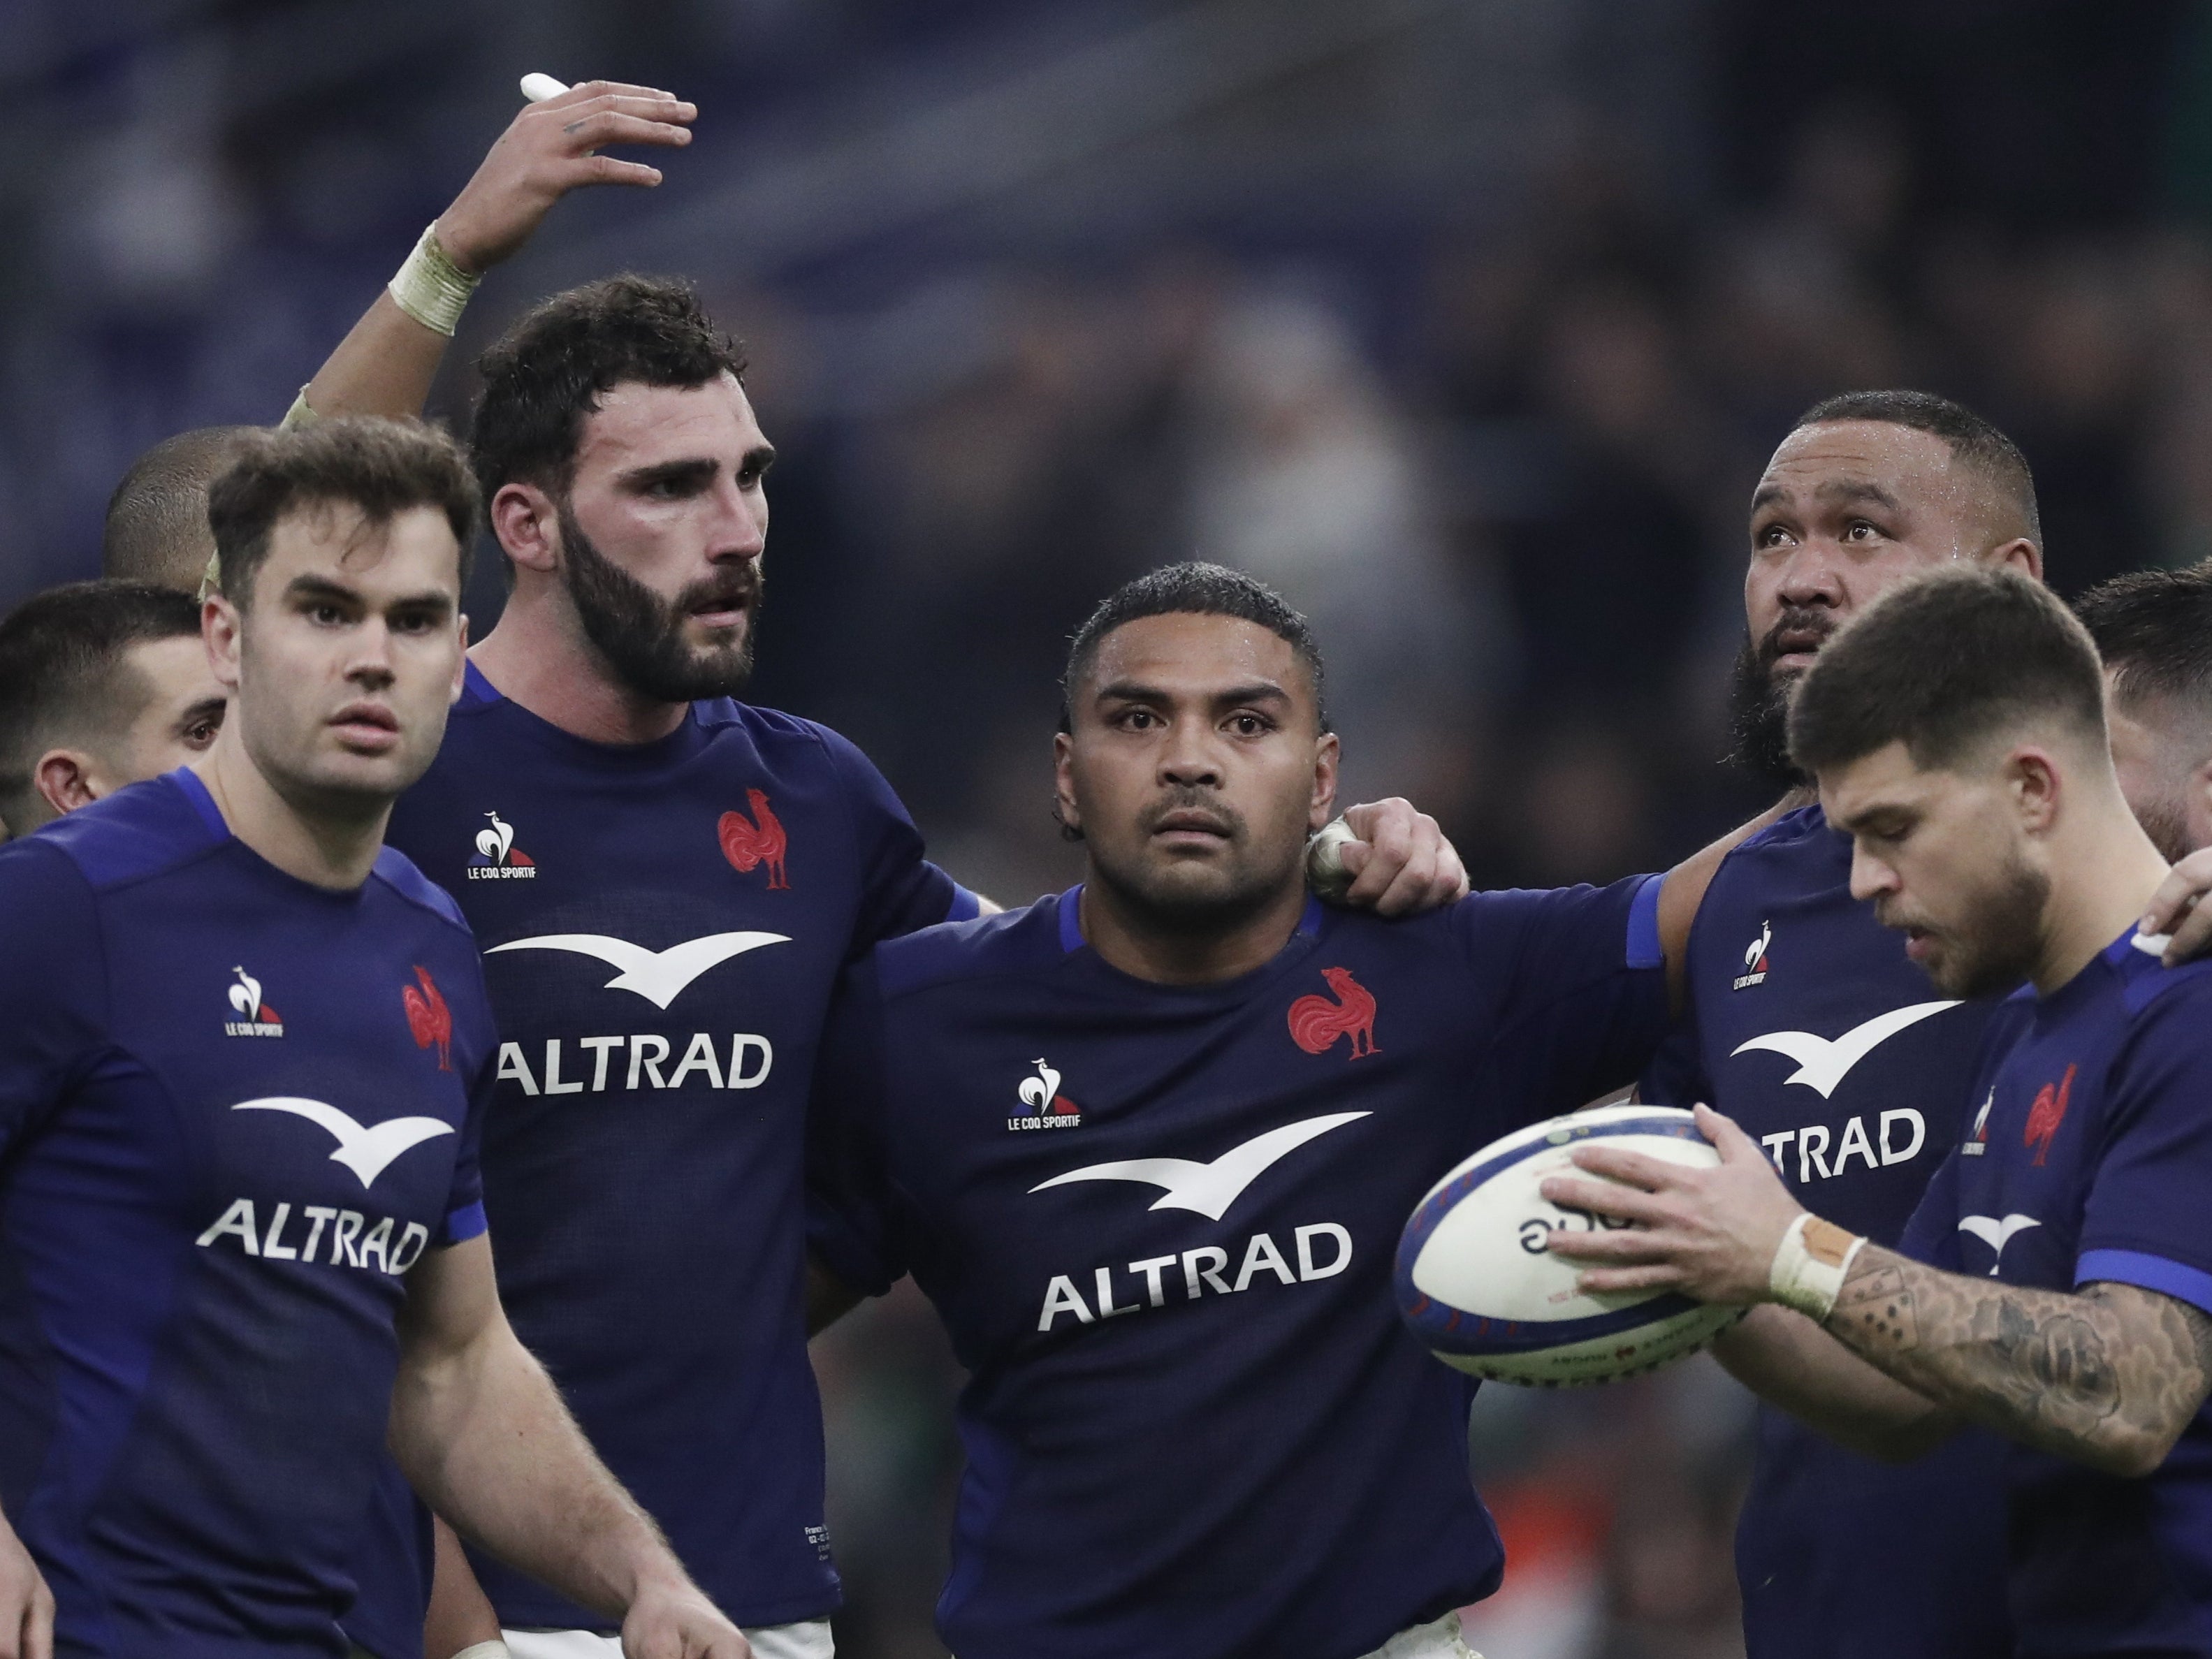 France suffered a bruising defeat to start their Six Nations campaign